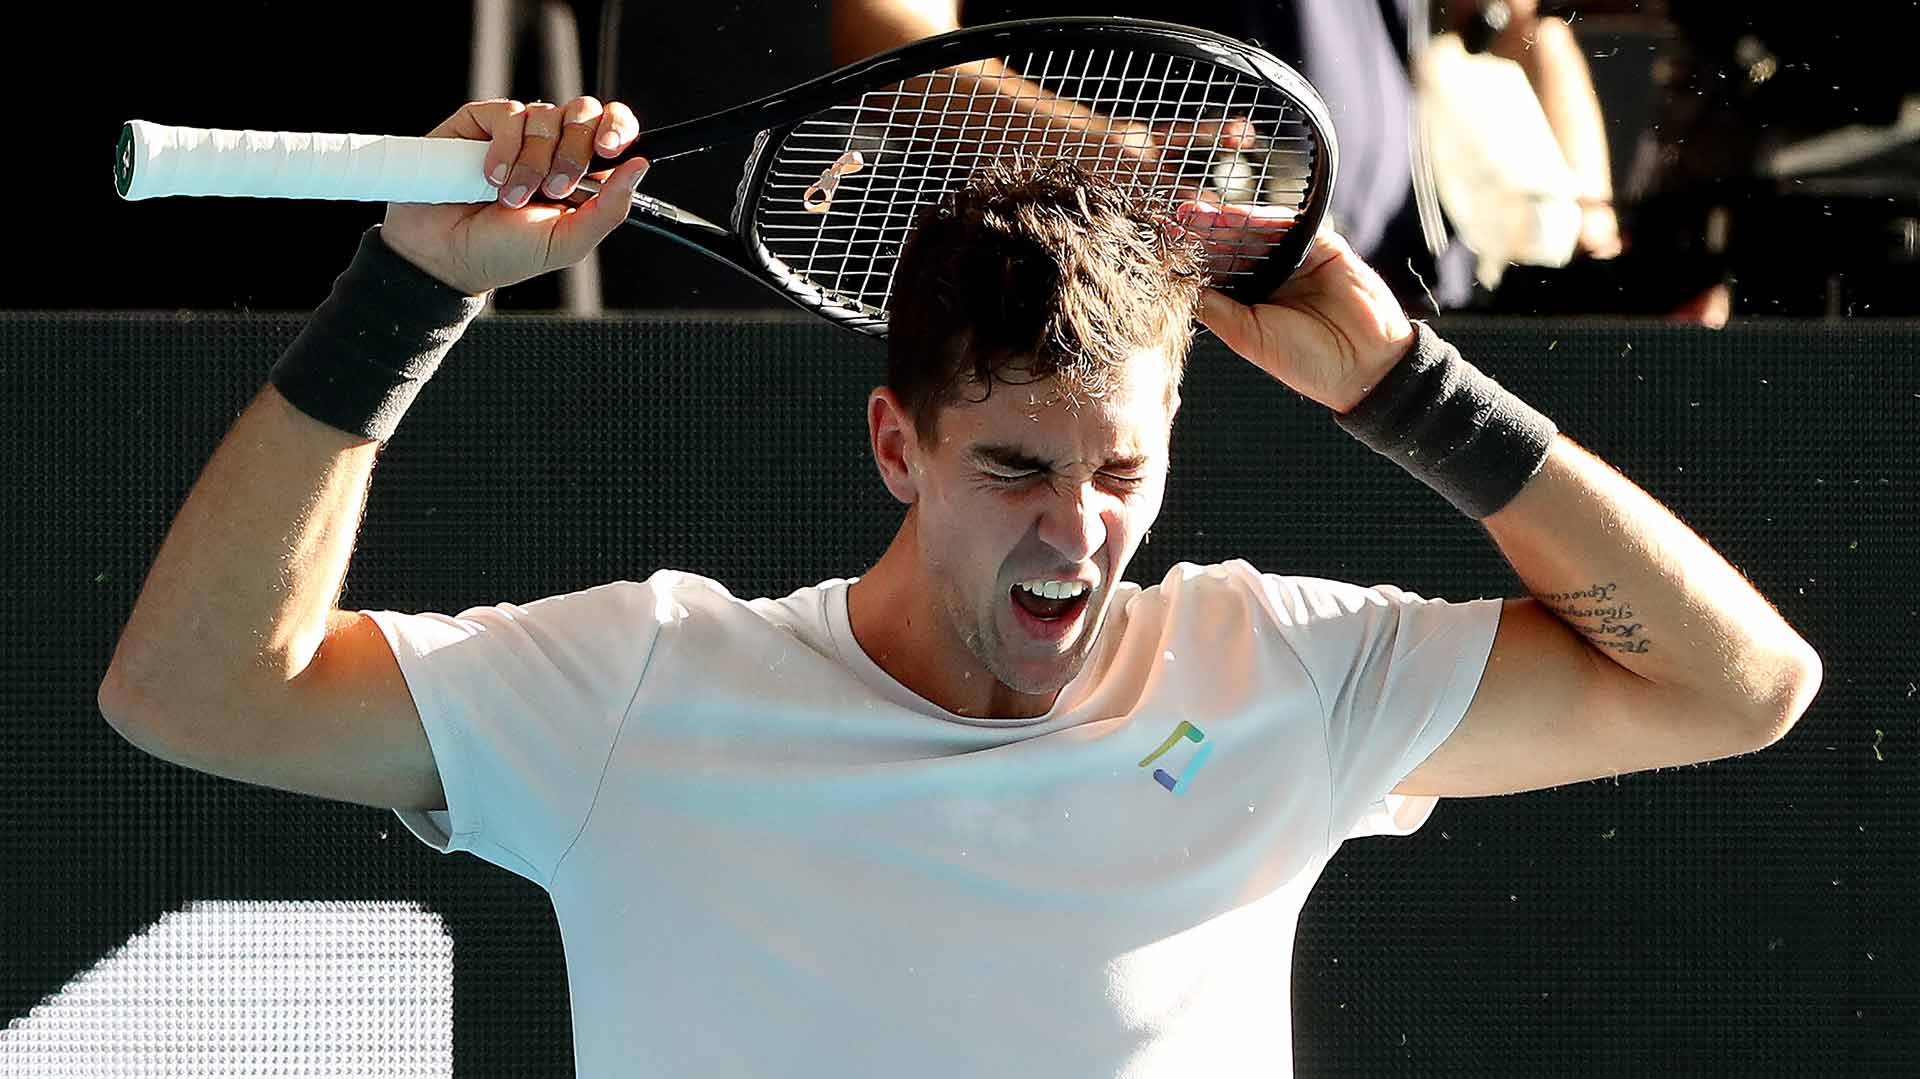 Thanasi Kokkinakis claimed his first ATP Tour title Saturday in Adelaide.